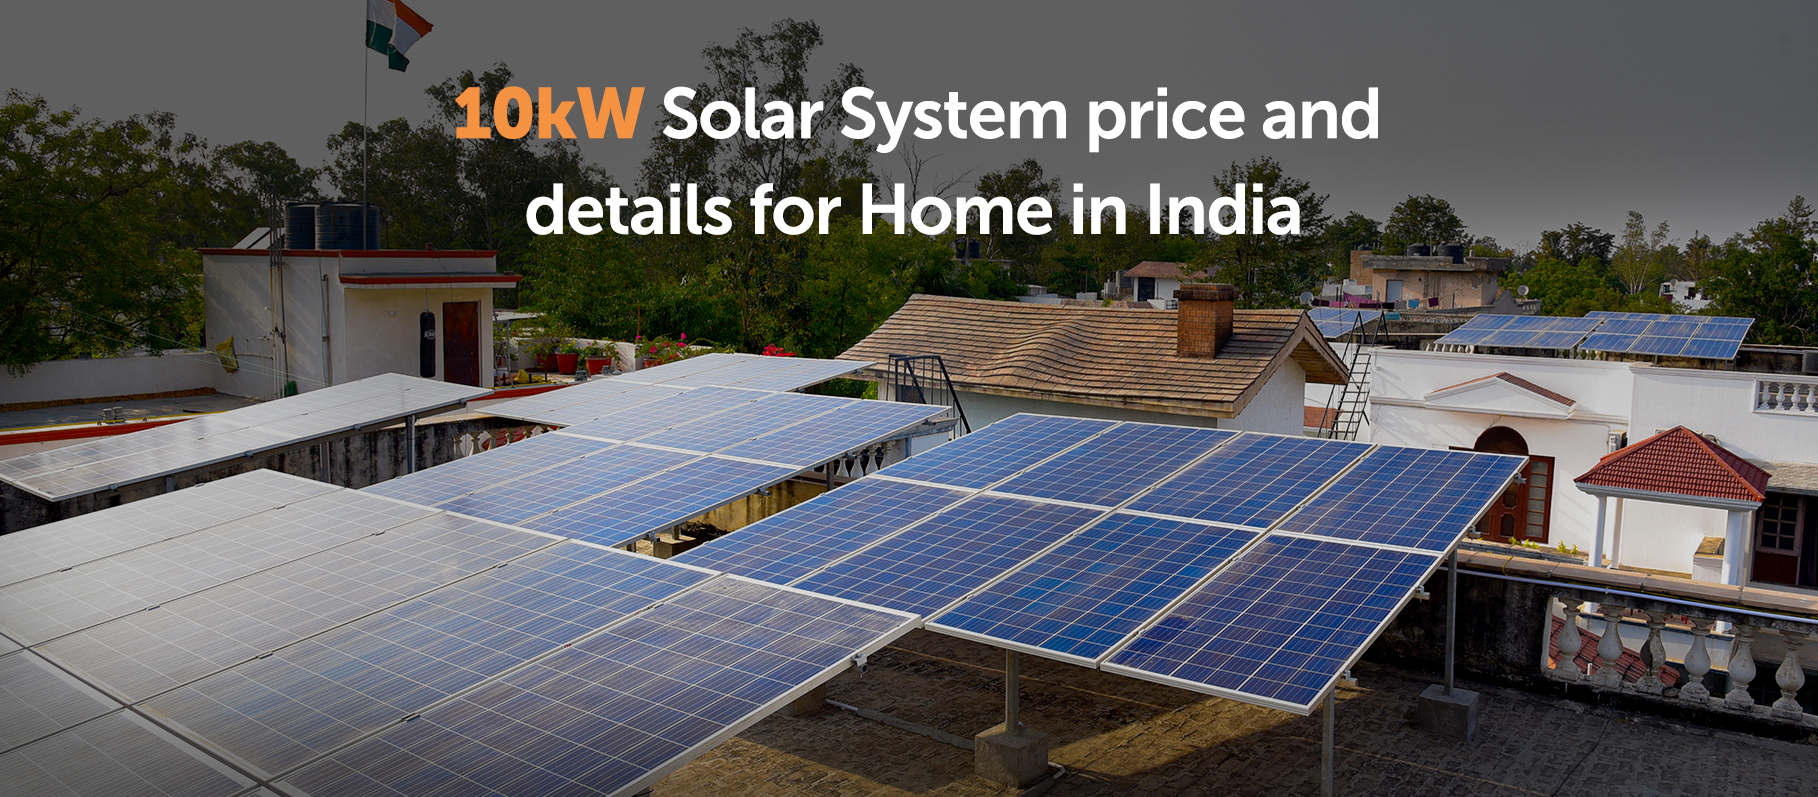 10kW Solar System Price in India with Subsidy, Installation Cost, Benefits